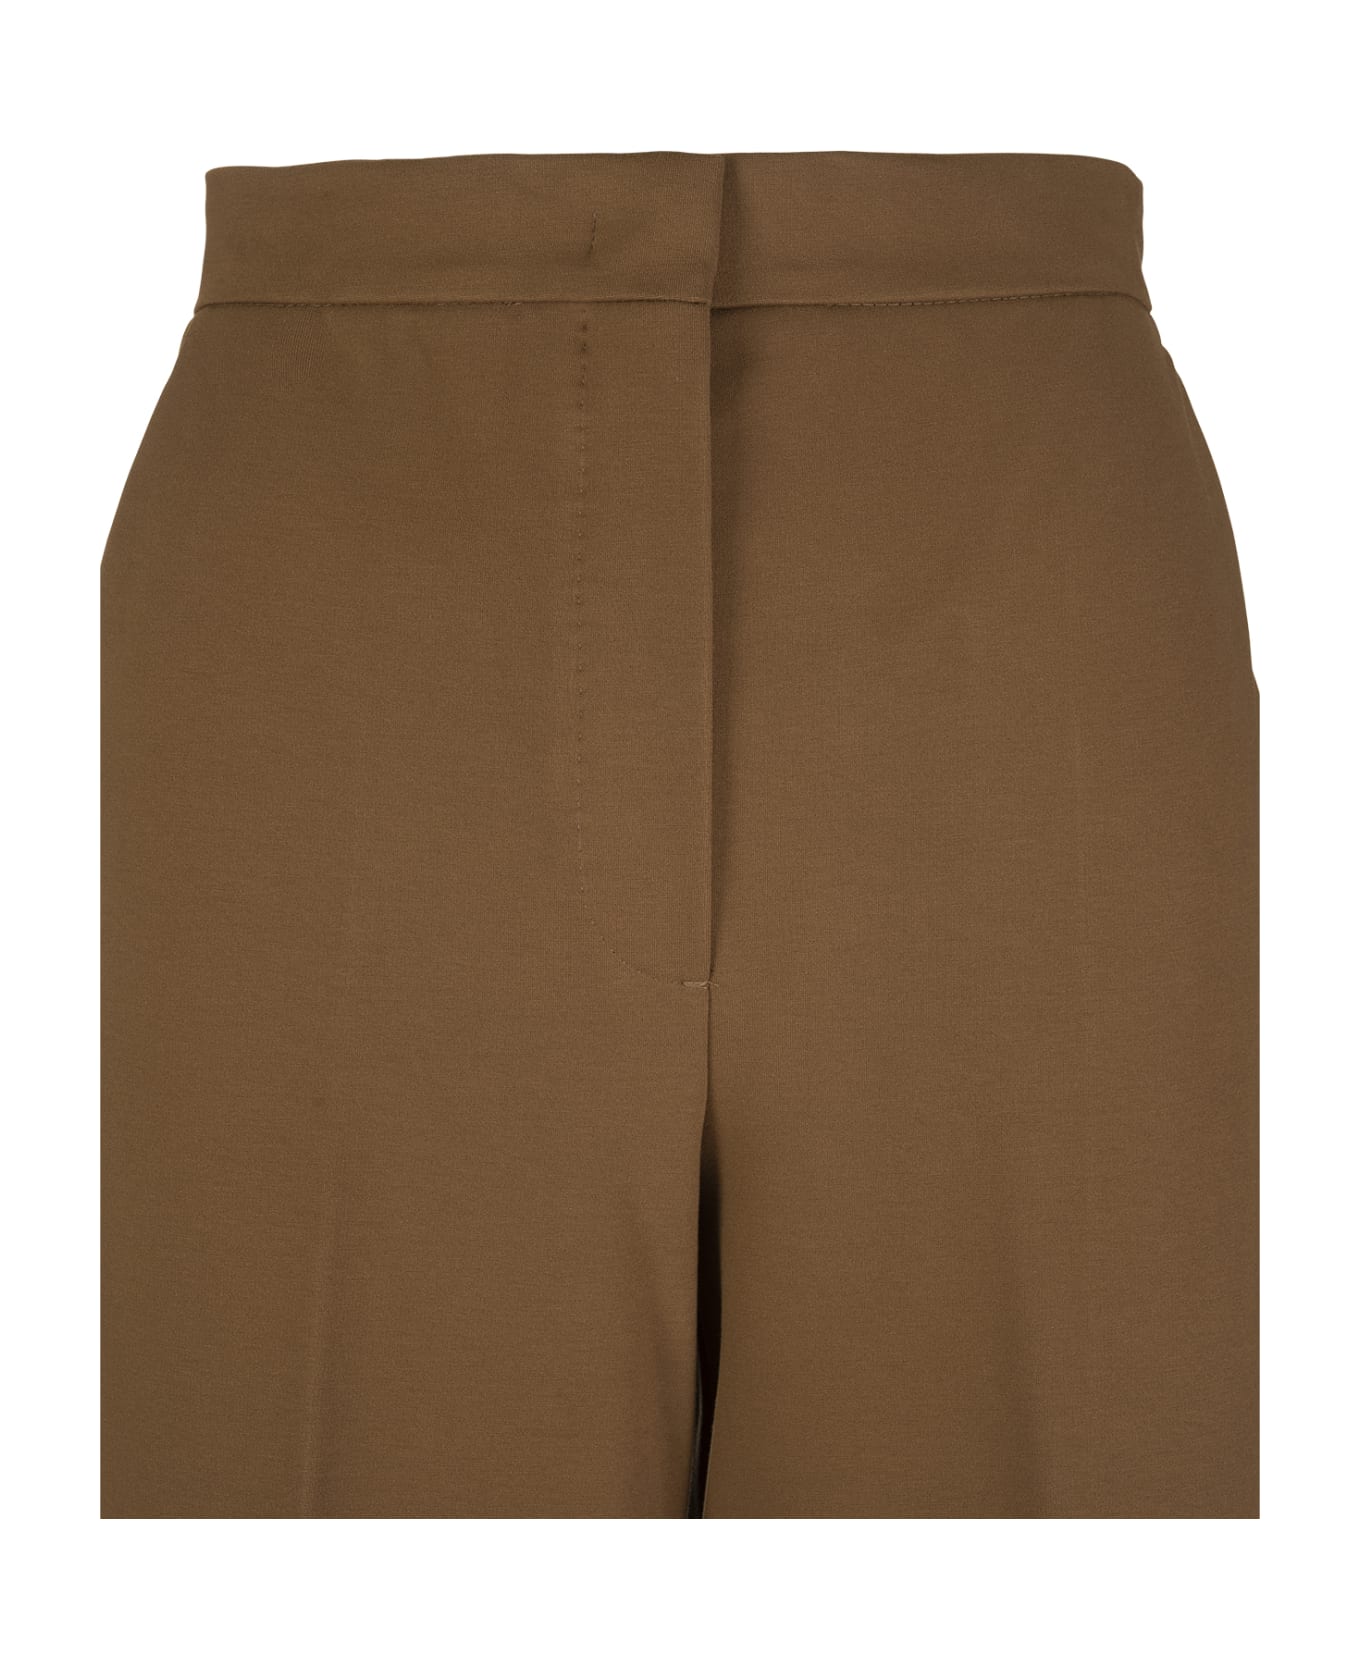 Max Mara Woman Tronto Trousers In Brown Viscose Jersey - Cuoio